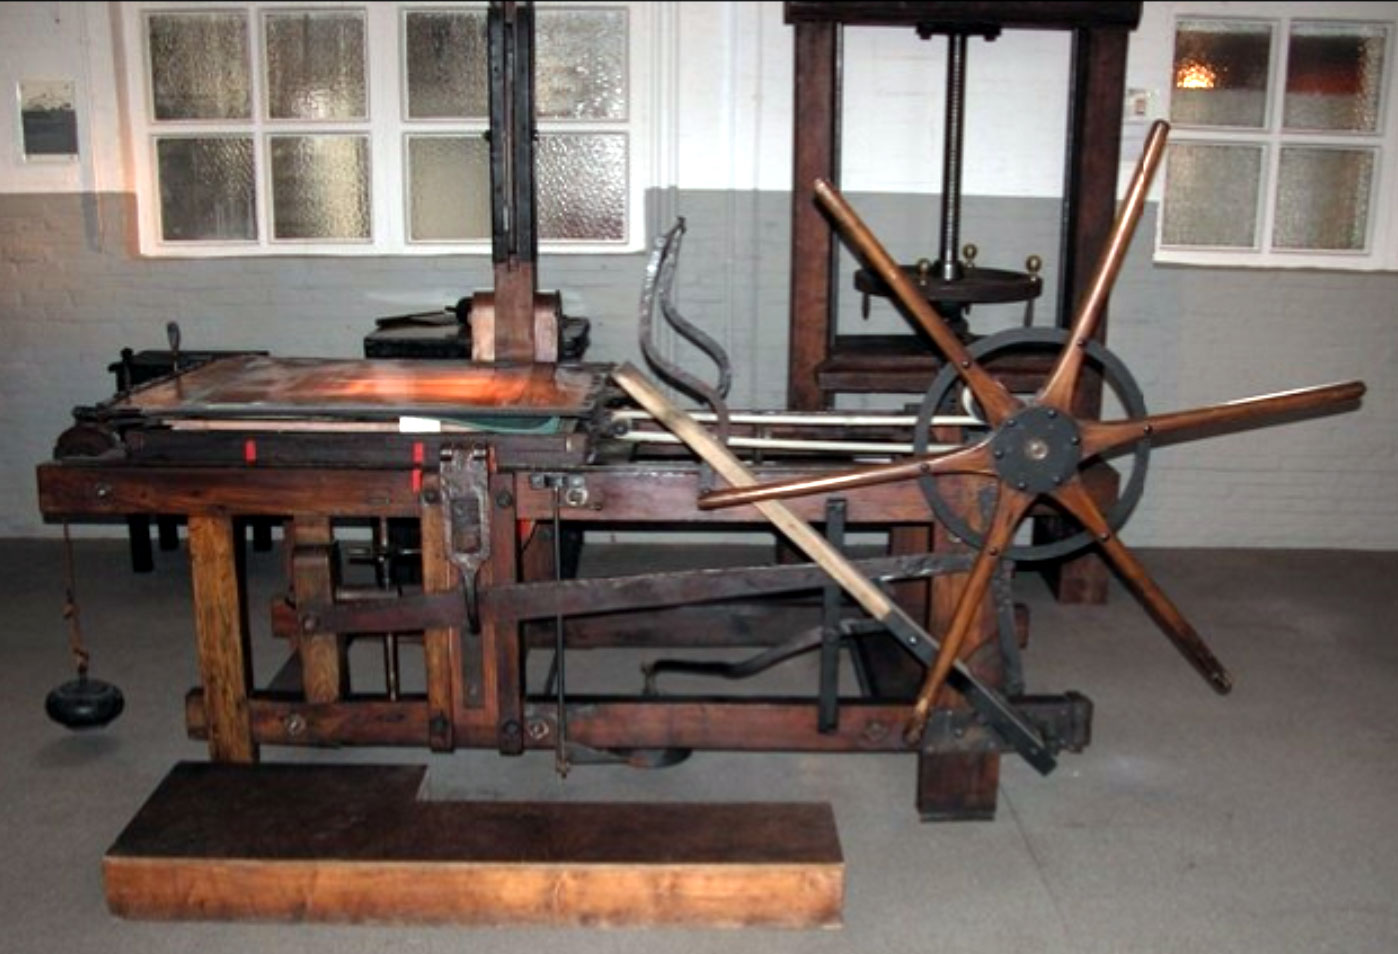 hand-operated printing press from the former Mesmaekers company in Turnhout, 1855 – 1865